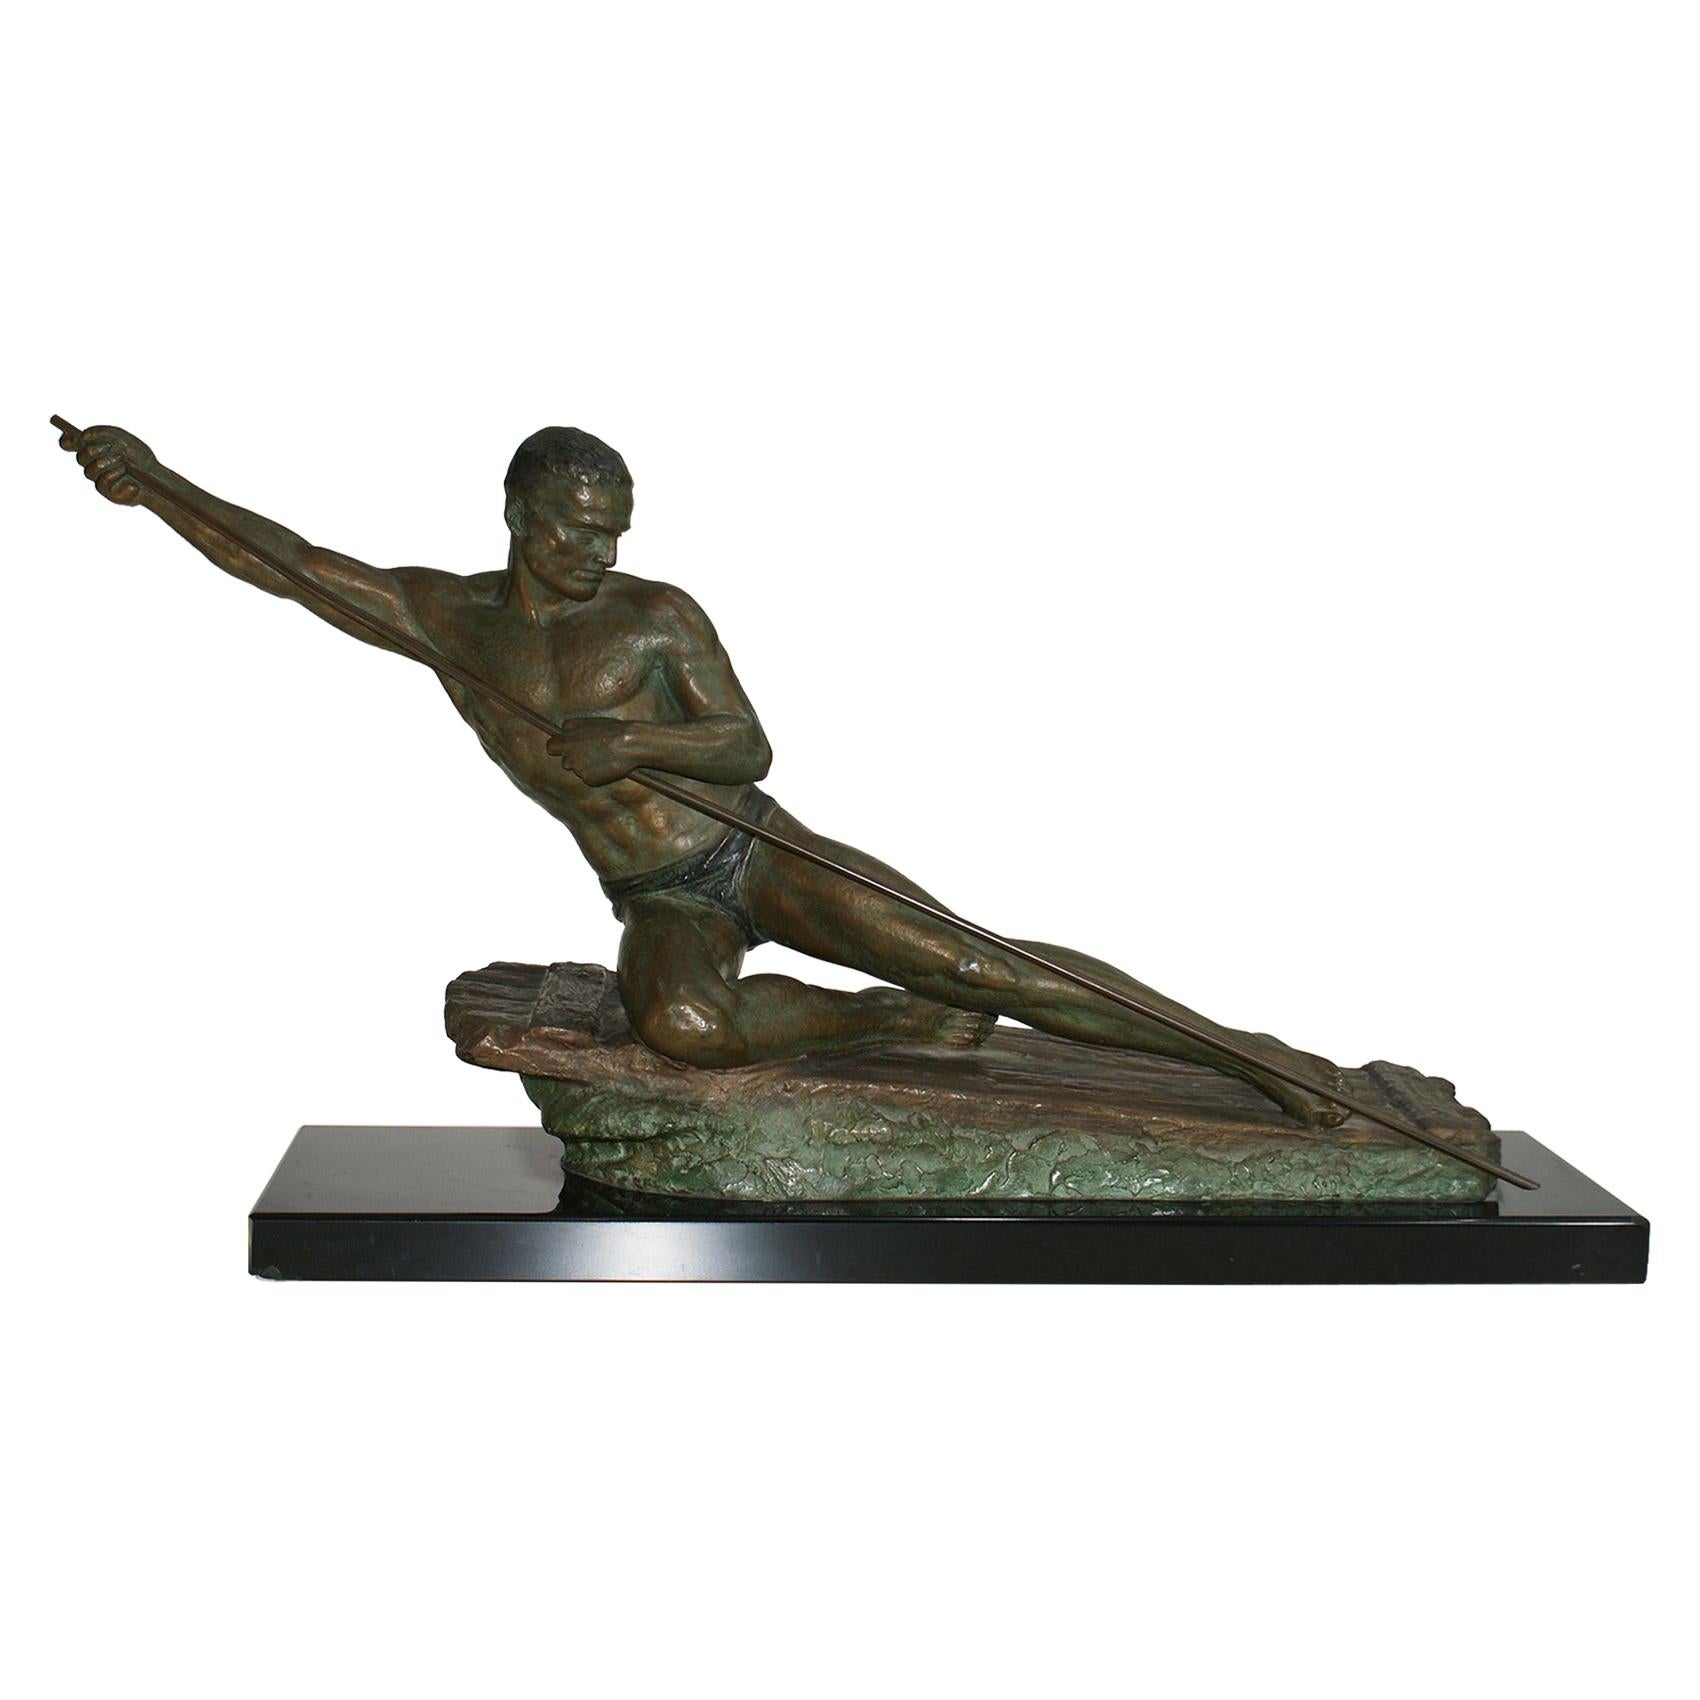 "The Man on a Raft” Lovely European Sculpture Signed by Cipriani